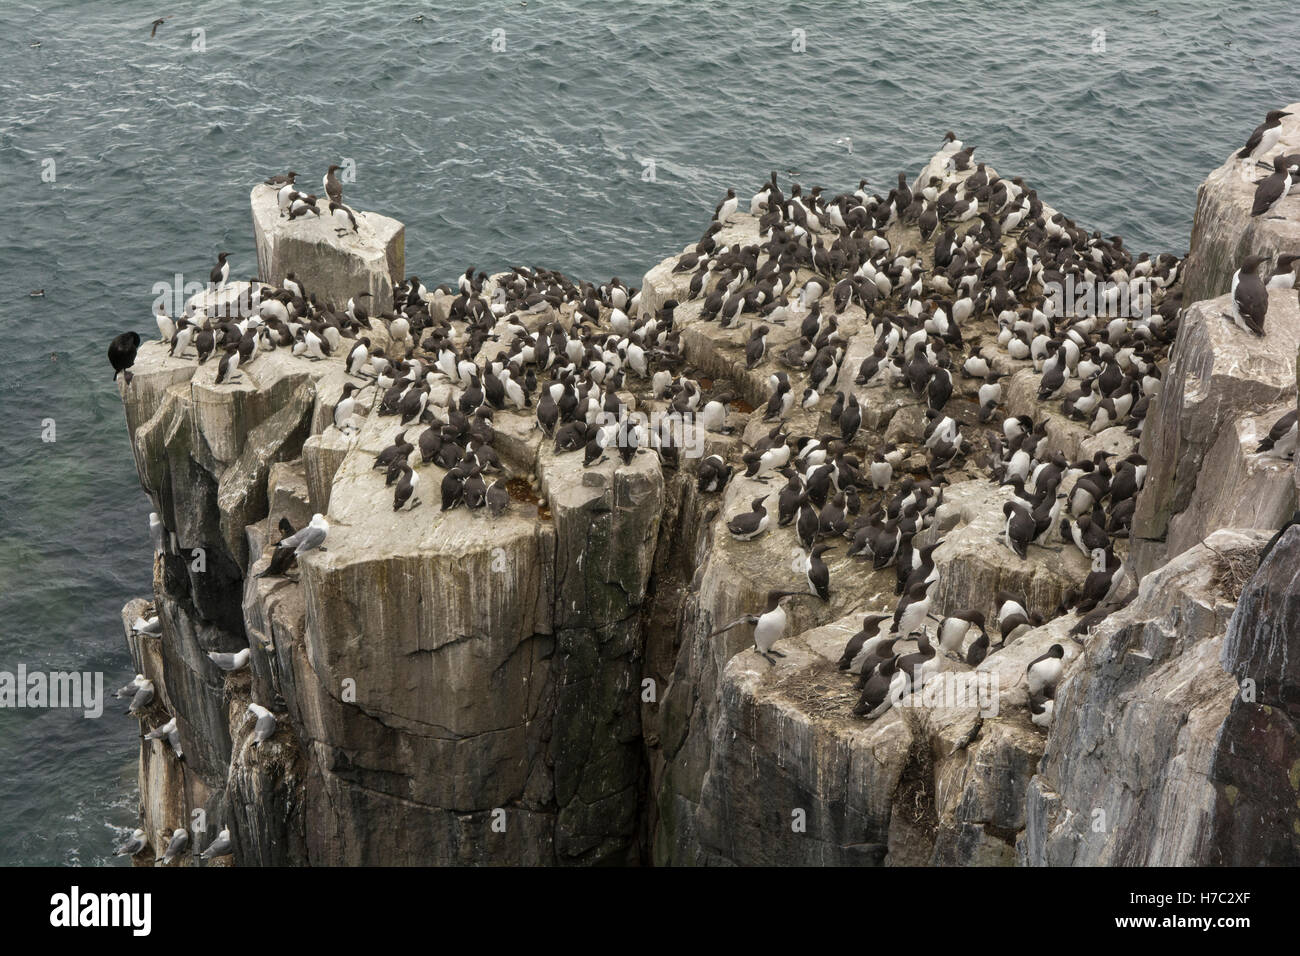 Guillemots nesting in a colony on rocky cliffs on the Farne Islands, Northumberland England Stock Photo